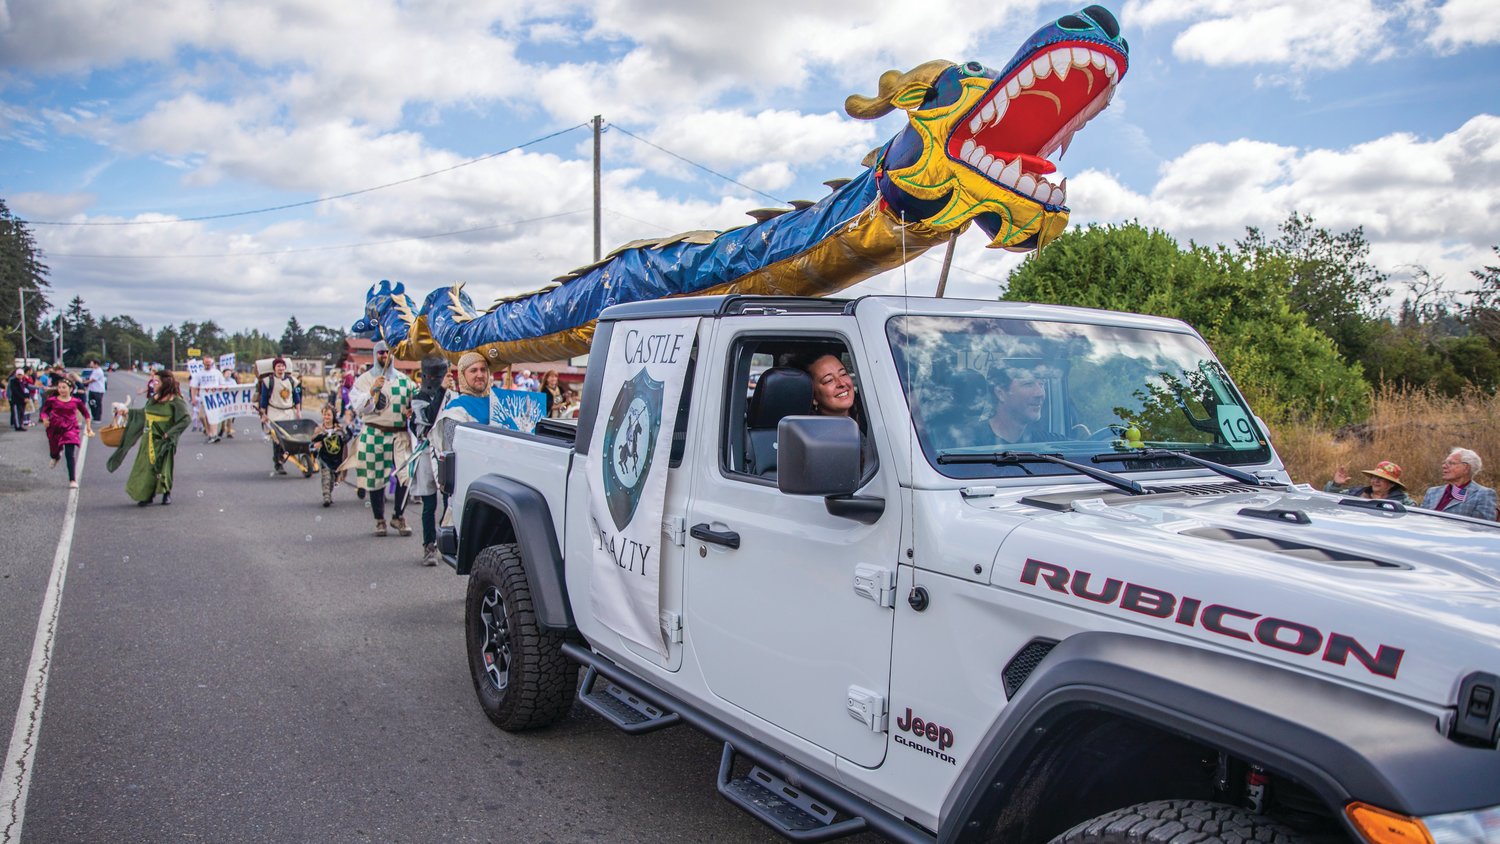 A dragon soars above the Castle Reality float Saturday in Rainier during the Round Up Days parade.